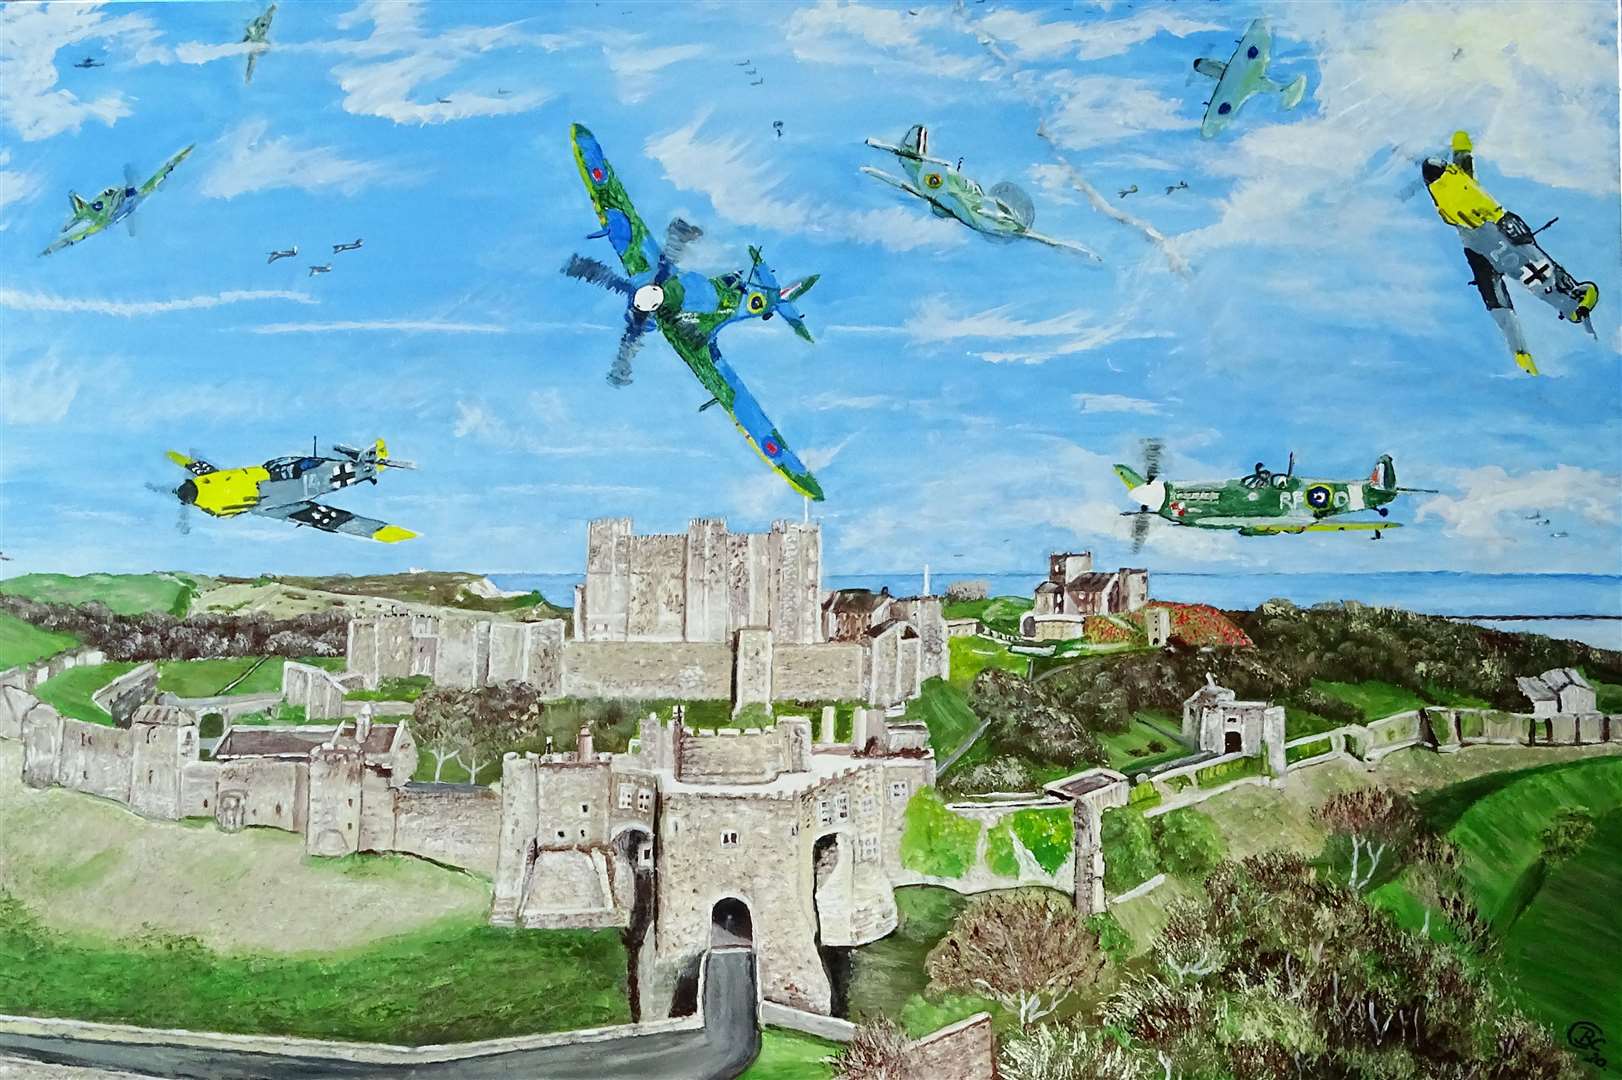 The Friends of Dover Castle commissioned artist Brian Cornwell to paint a picture of the Battle of Britain over the town